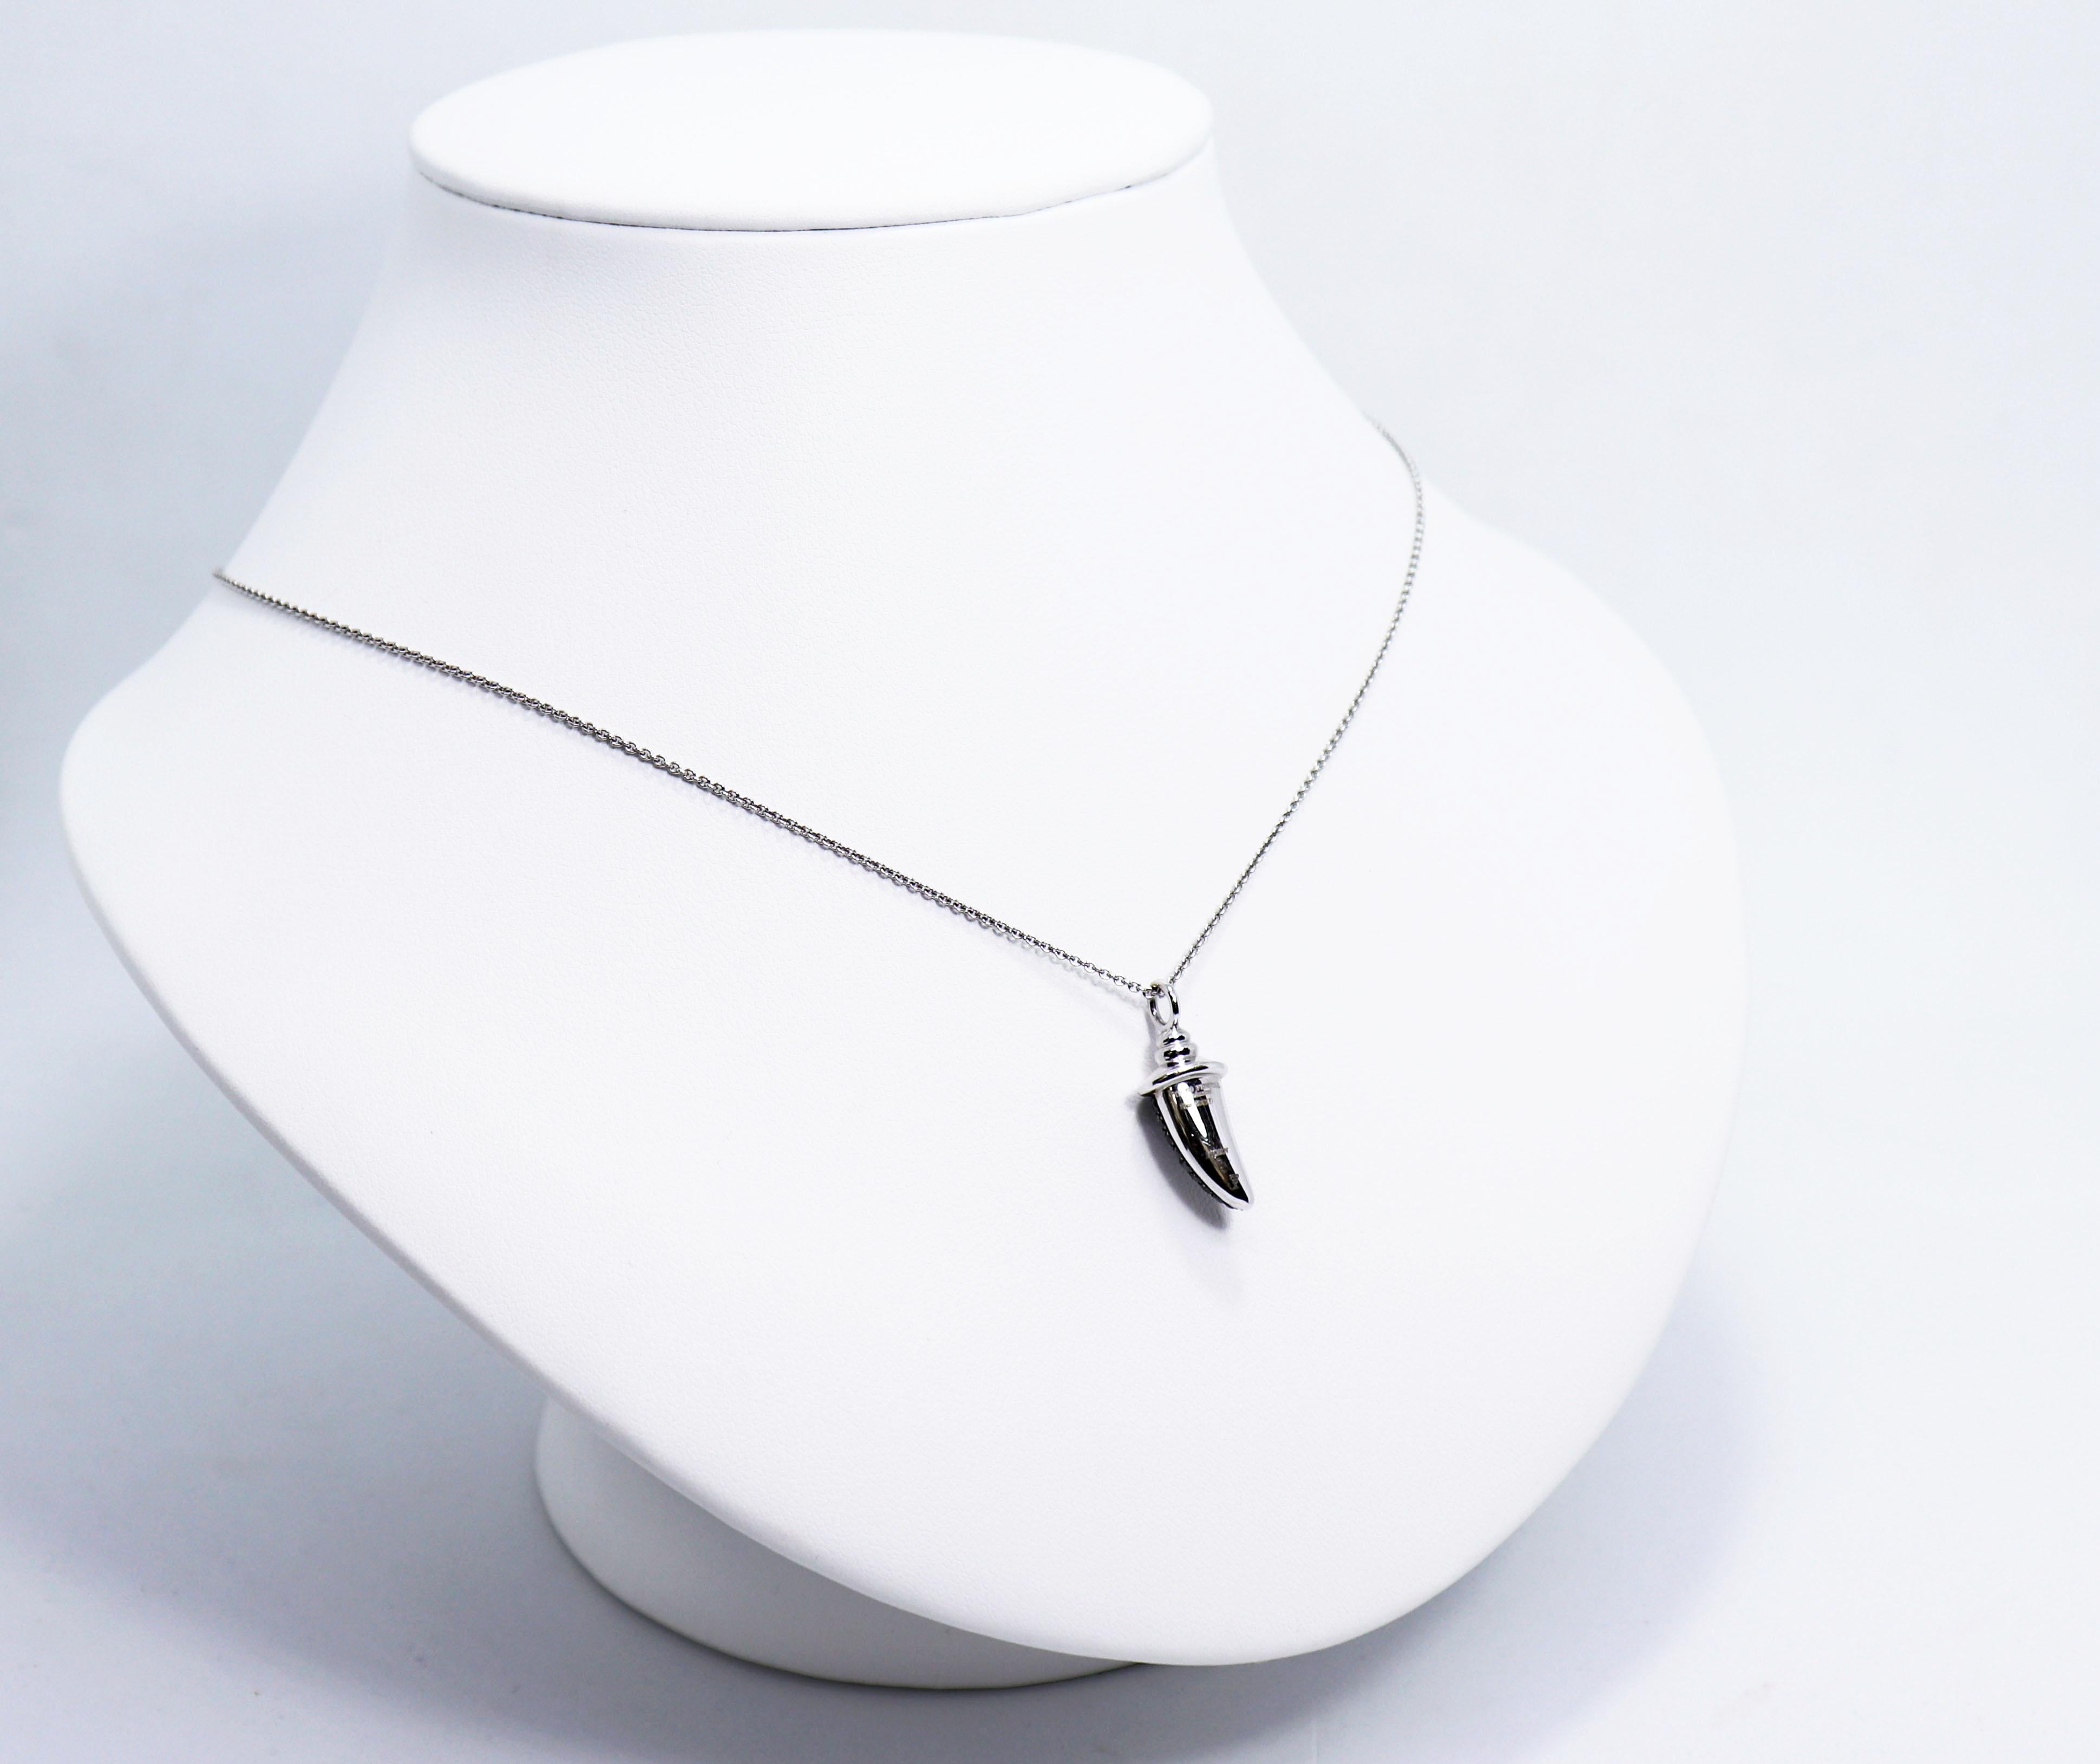 Round Cut Theo Fennell London 18 Carat White Gold and Black Diamond Horn Pendant and Chain